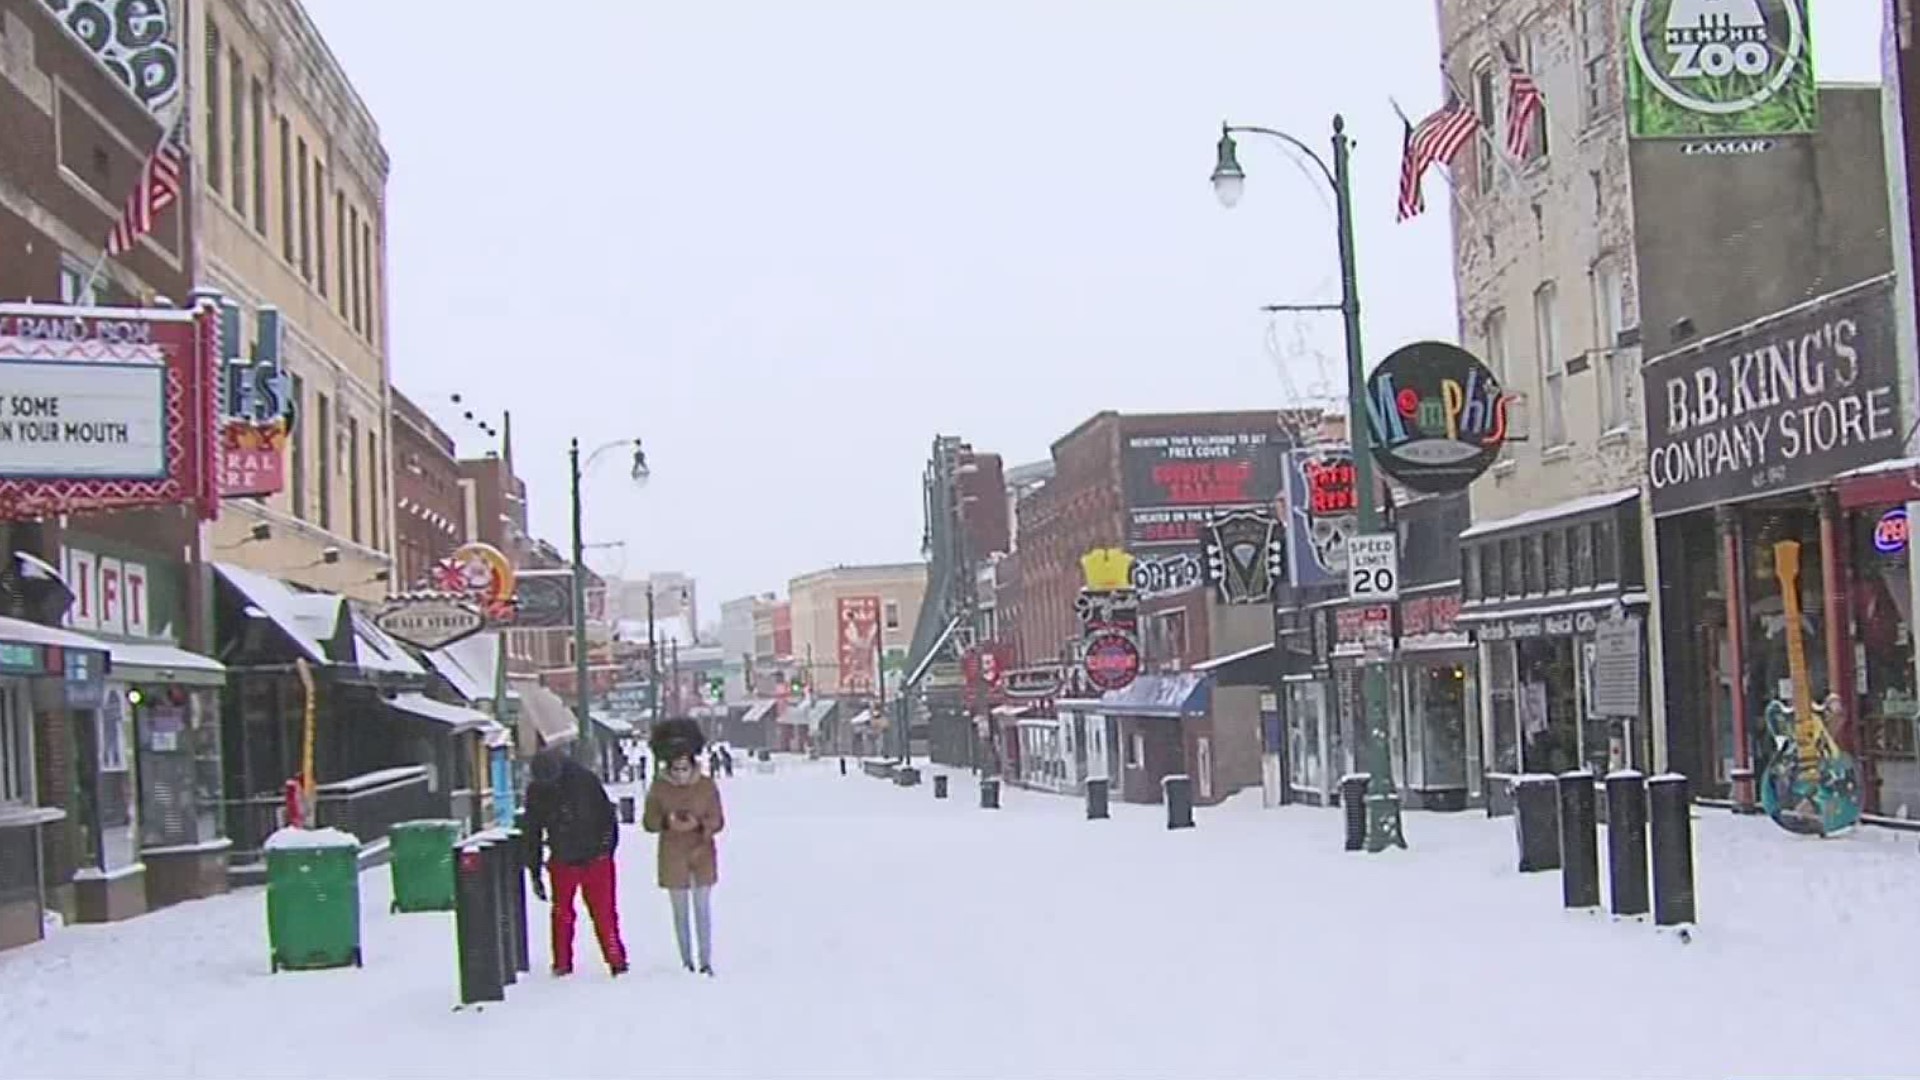 The Bluff City was a winter wonderland with iconic landmarks covered in snow.